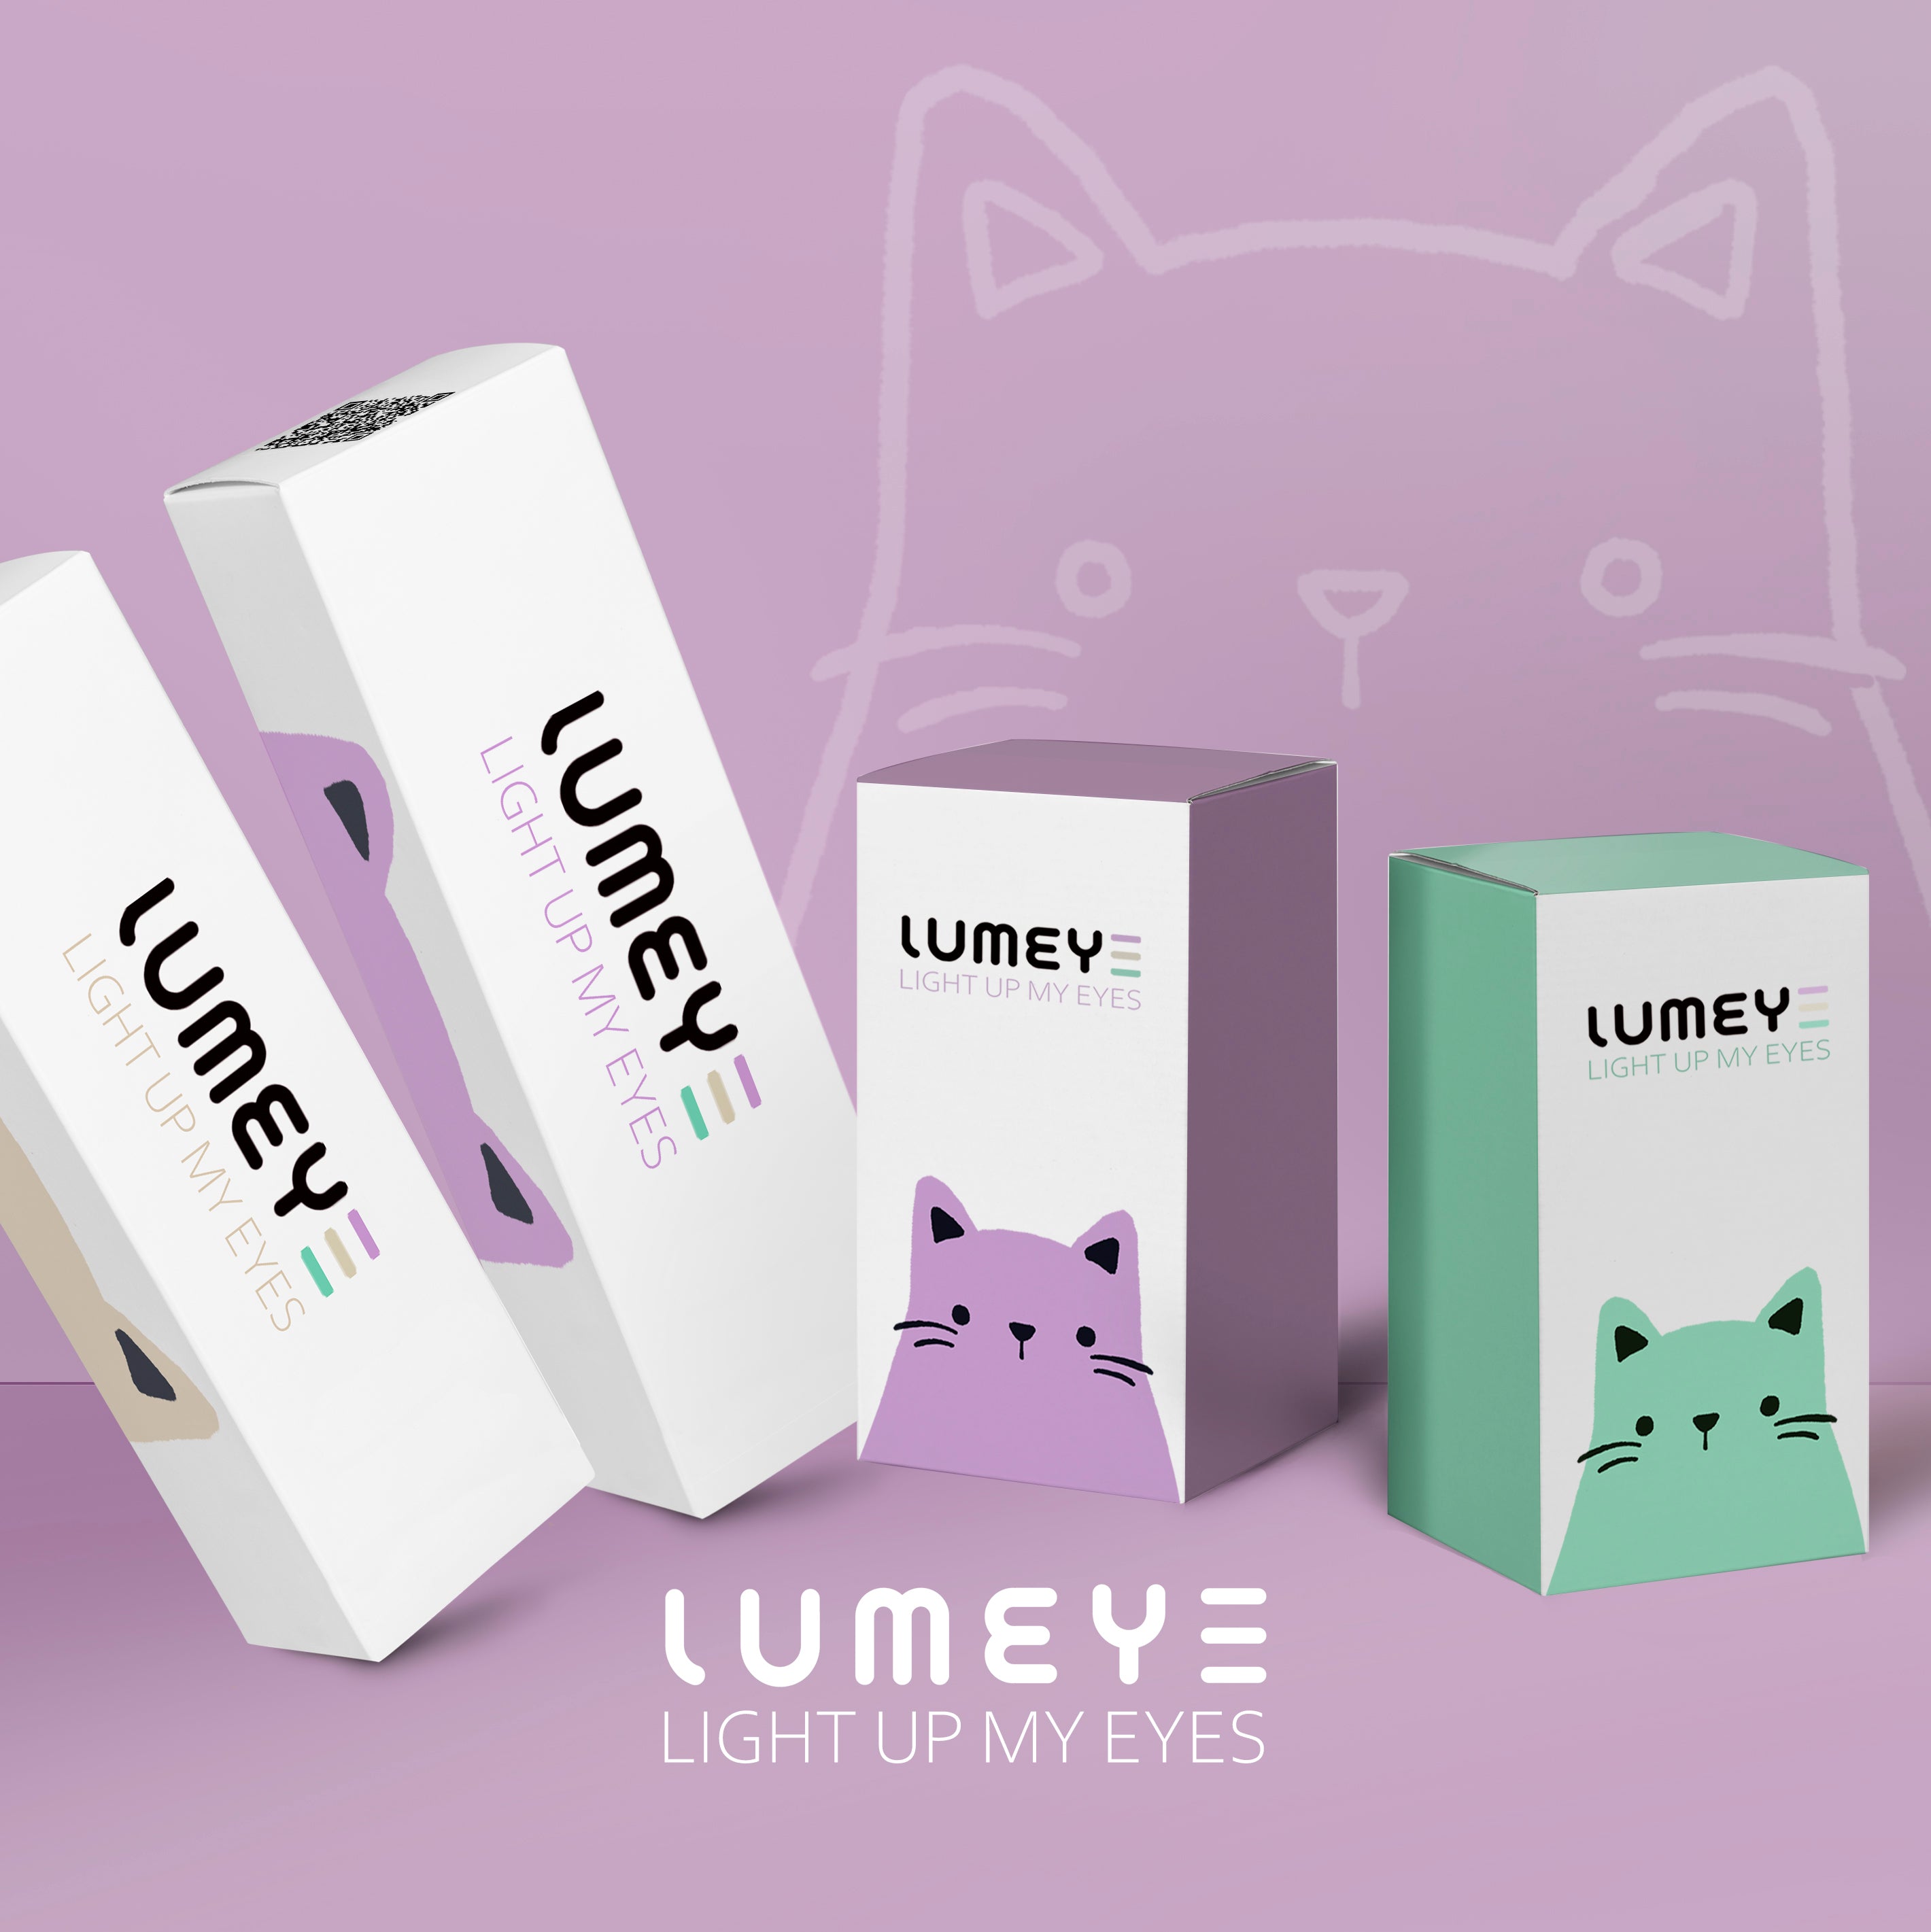 Best COLORED CONTACTS - LUMEYE Tomorrow Land Green Colored Contact Lenses - LUMEYE